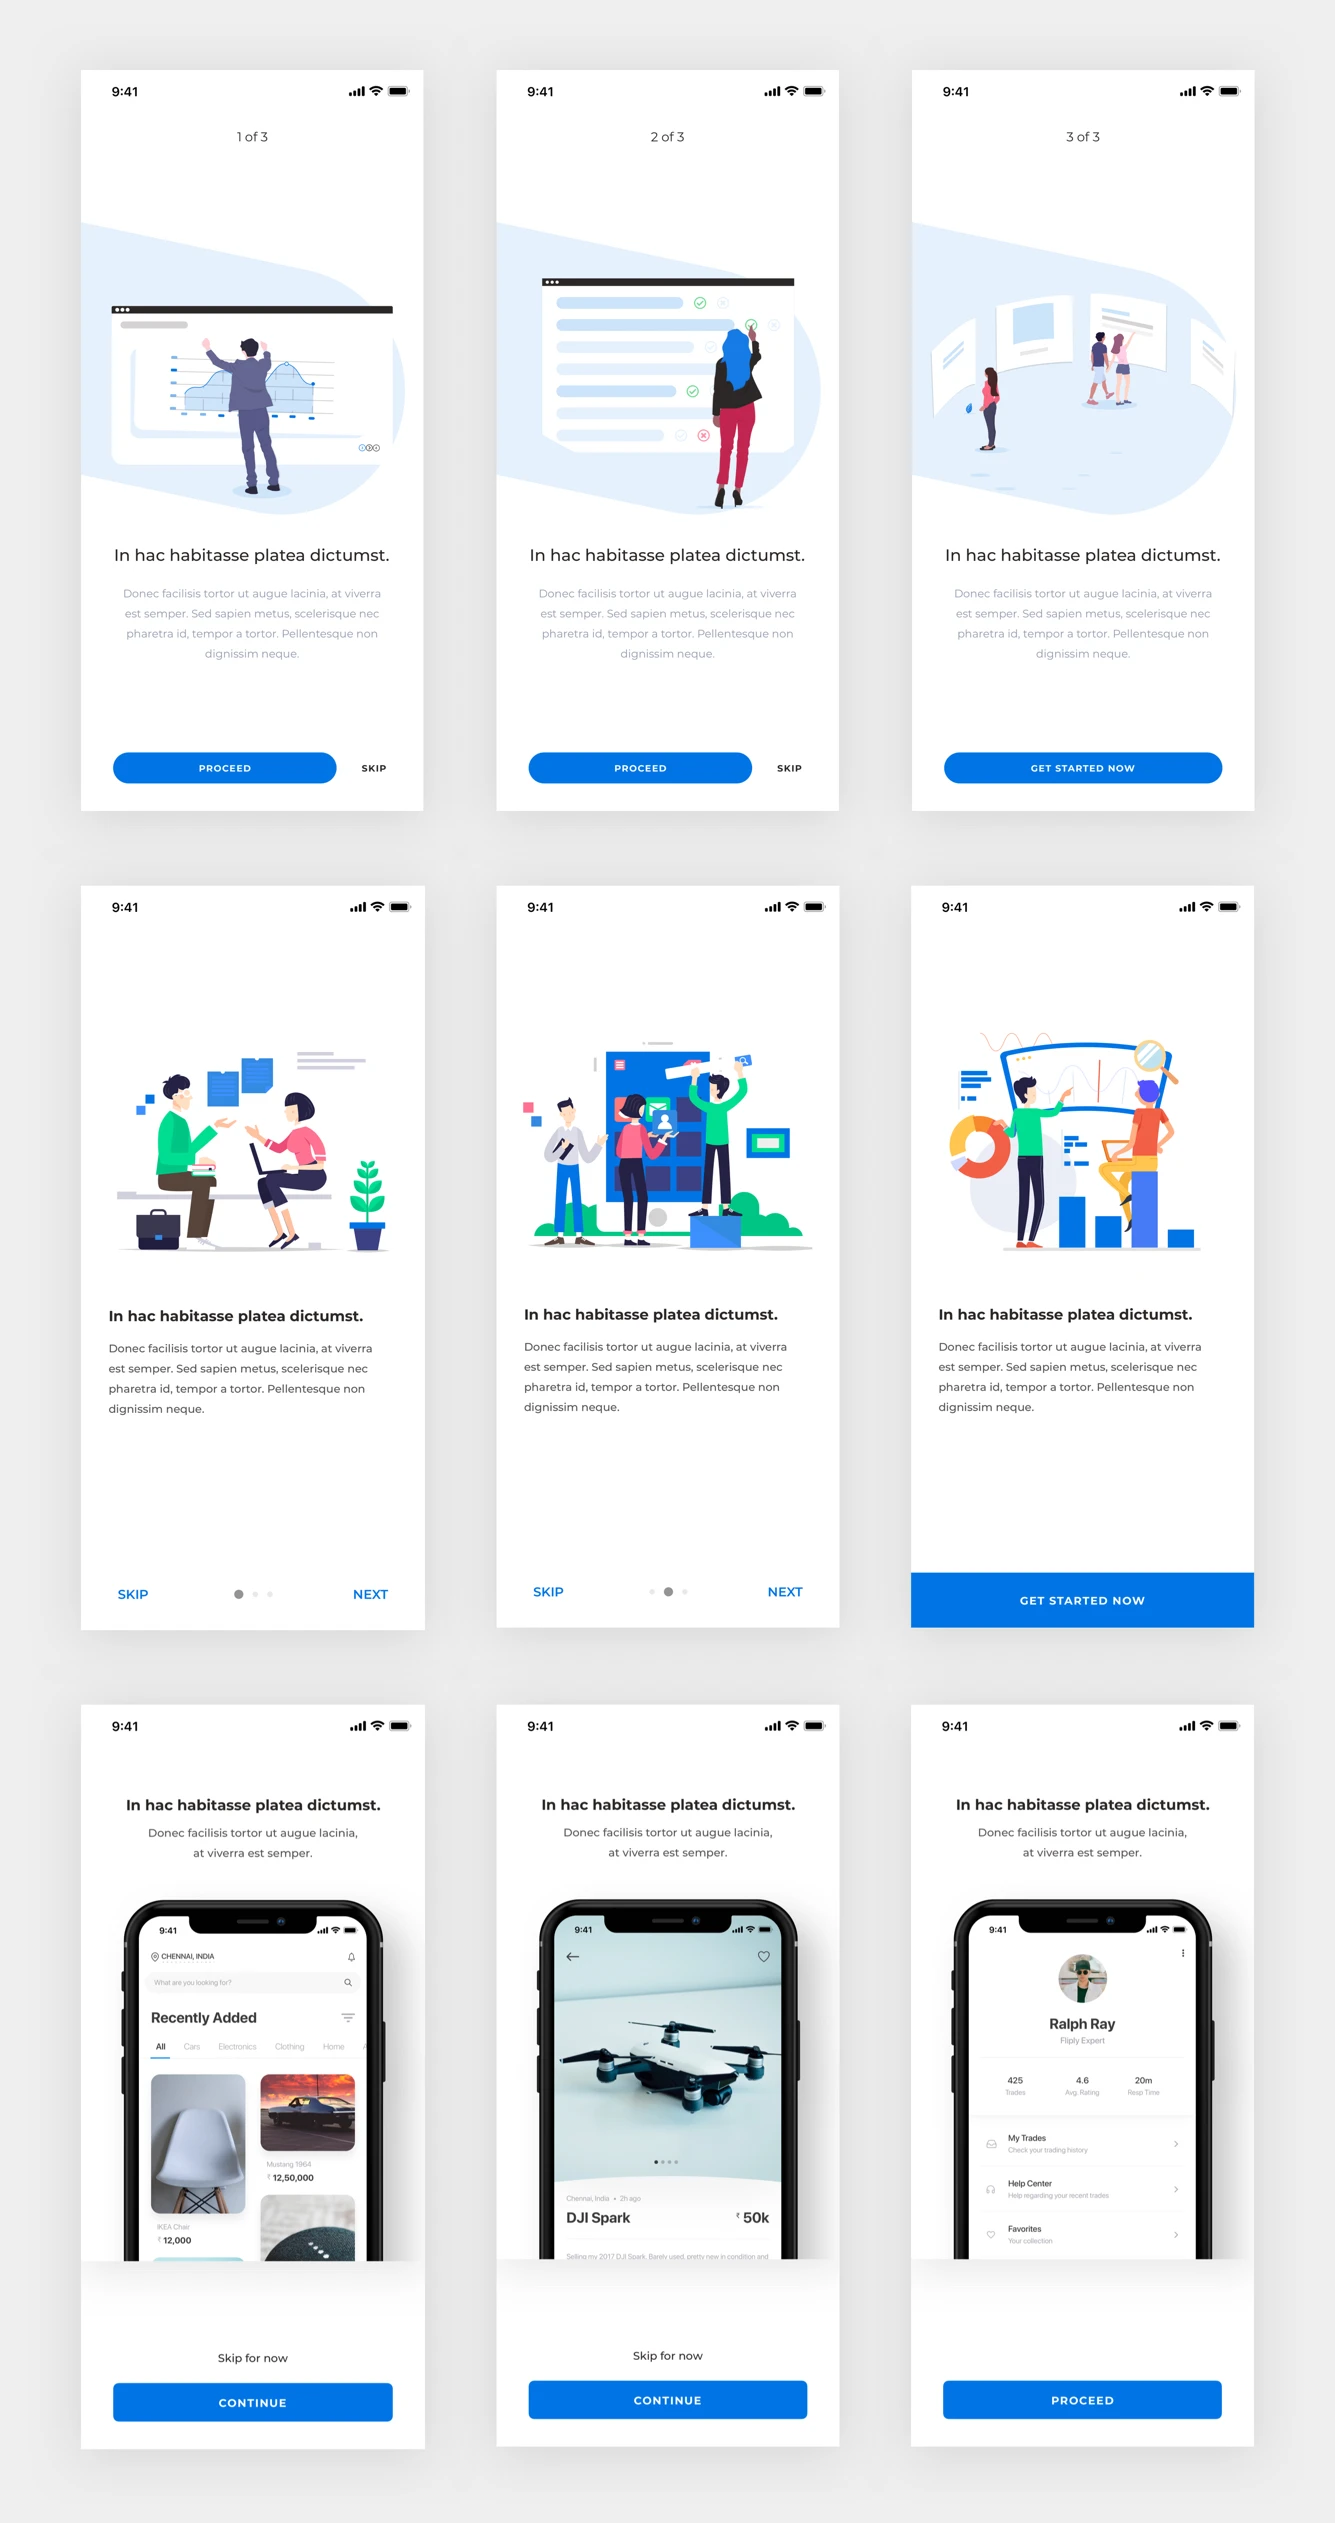 Mobile App Onboarding Screens - Minimal and clean app's onboarding process design, 9 screens for you to get started